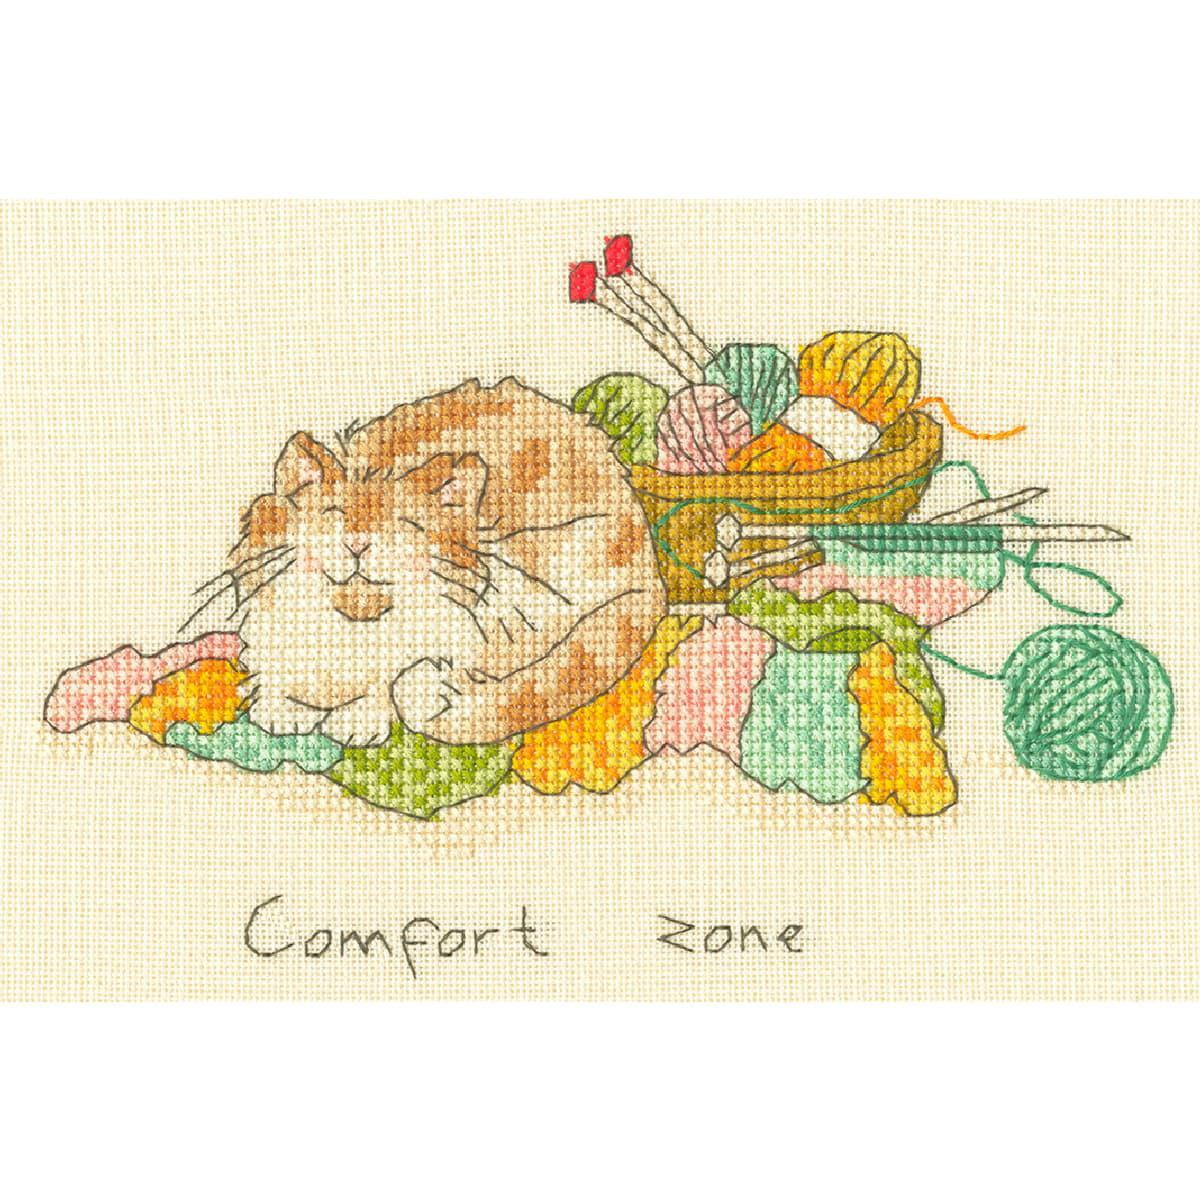 Bothy Threads counted cross stitch kit "Comfort...